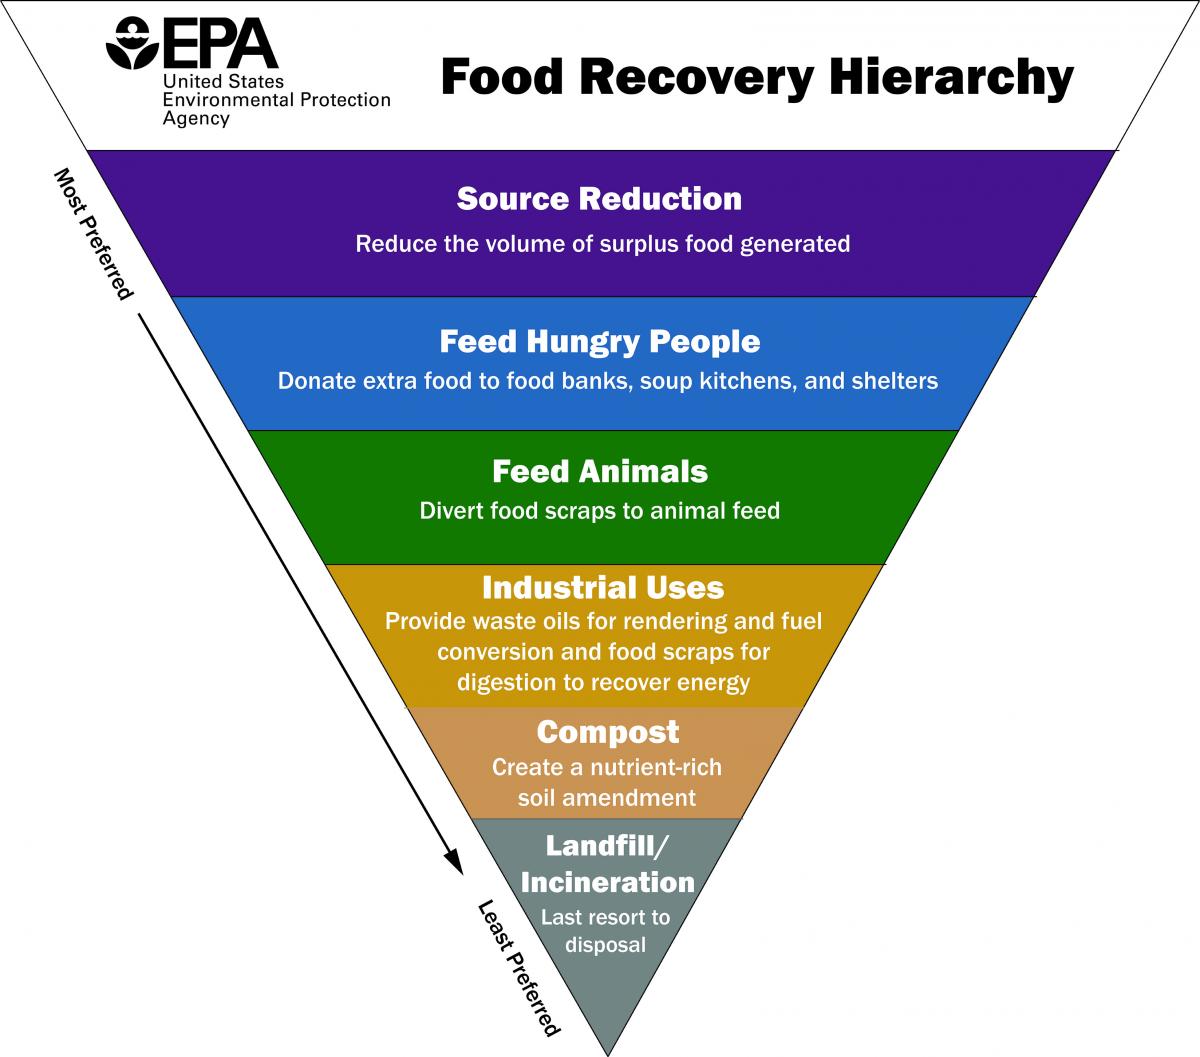 EPA Food Recovery Hierarchy chart